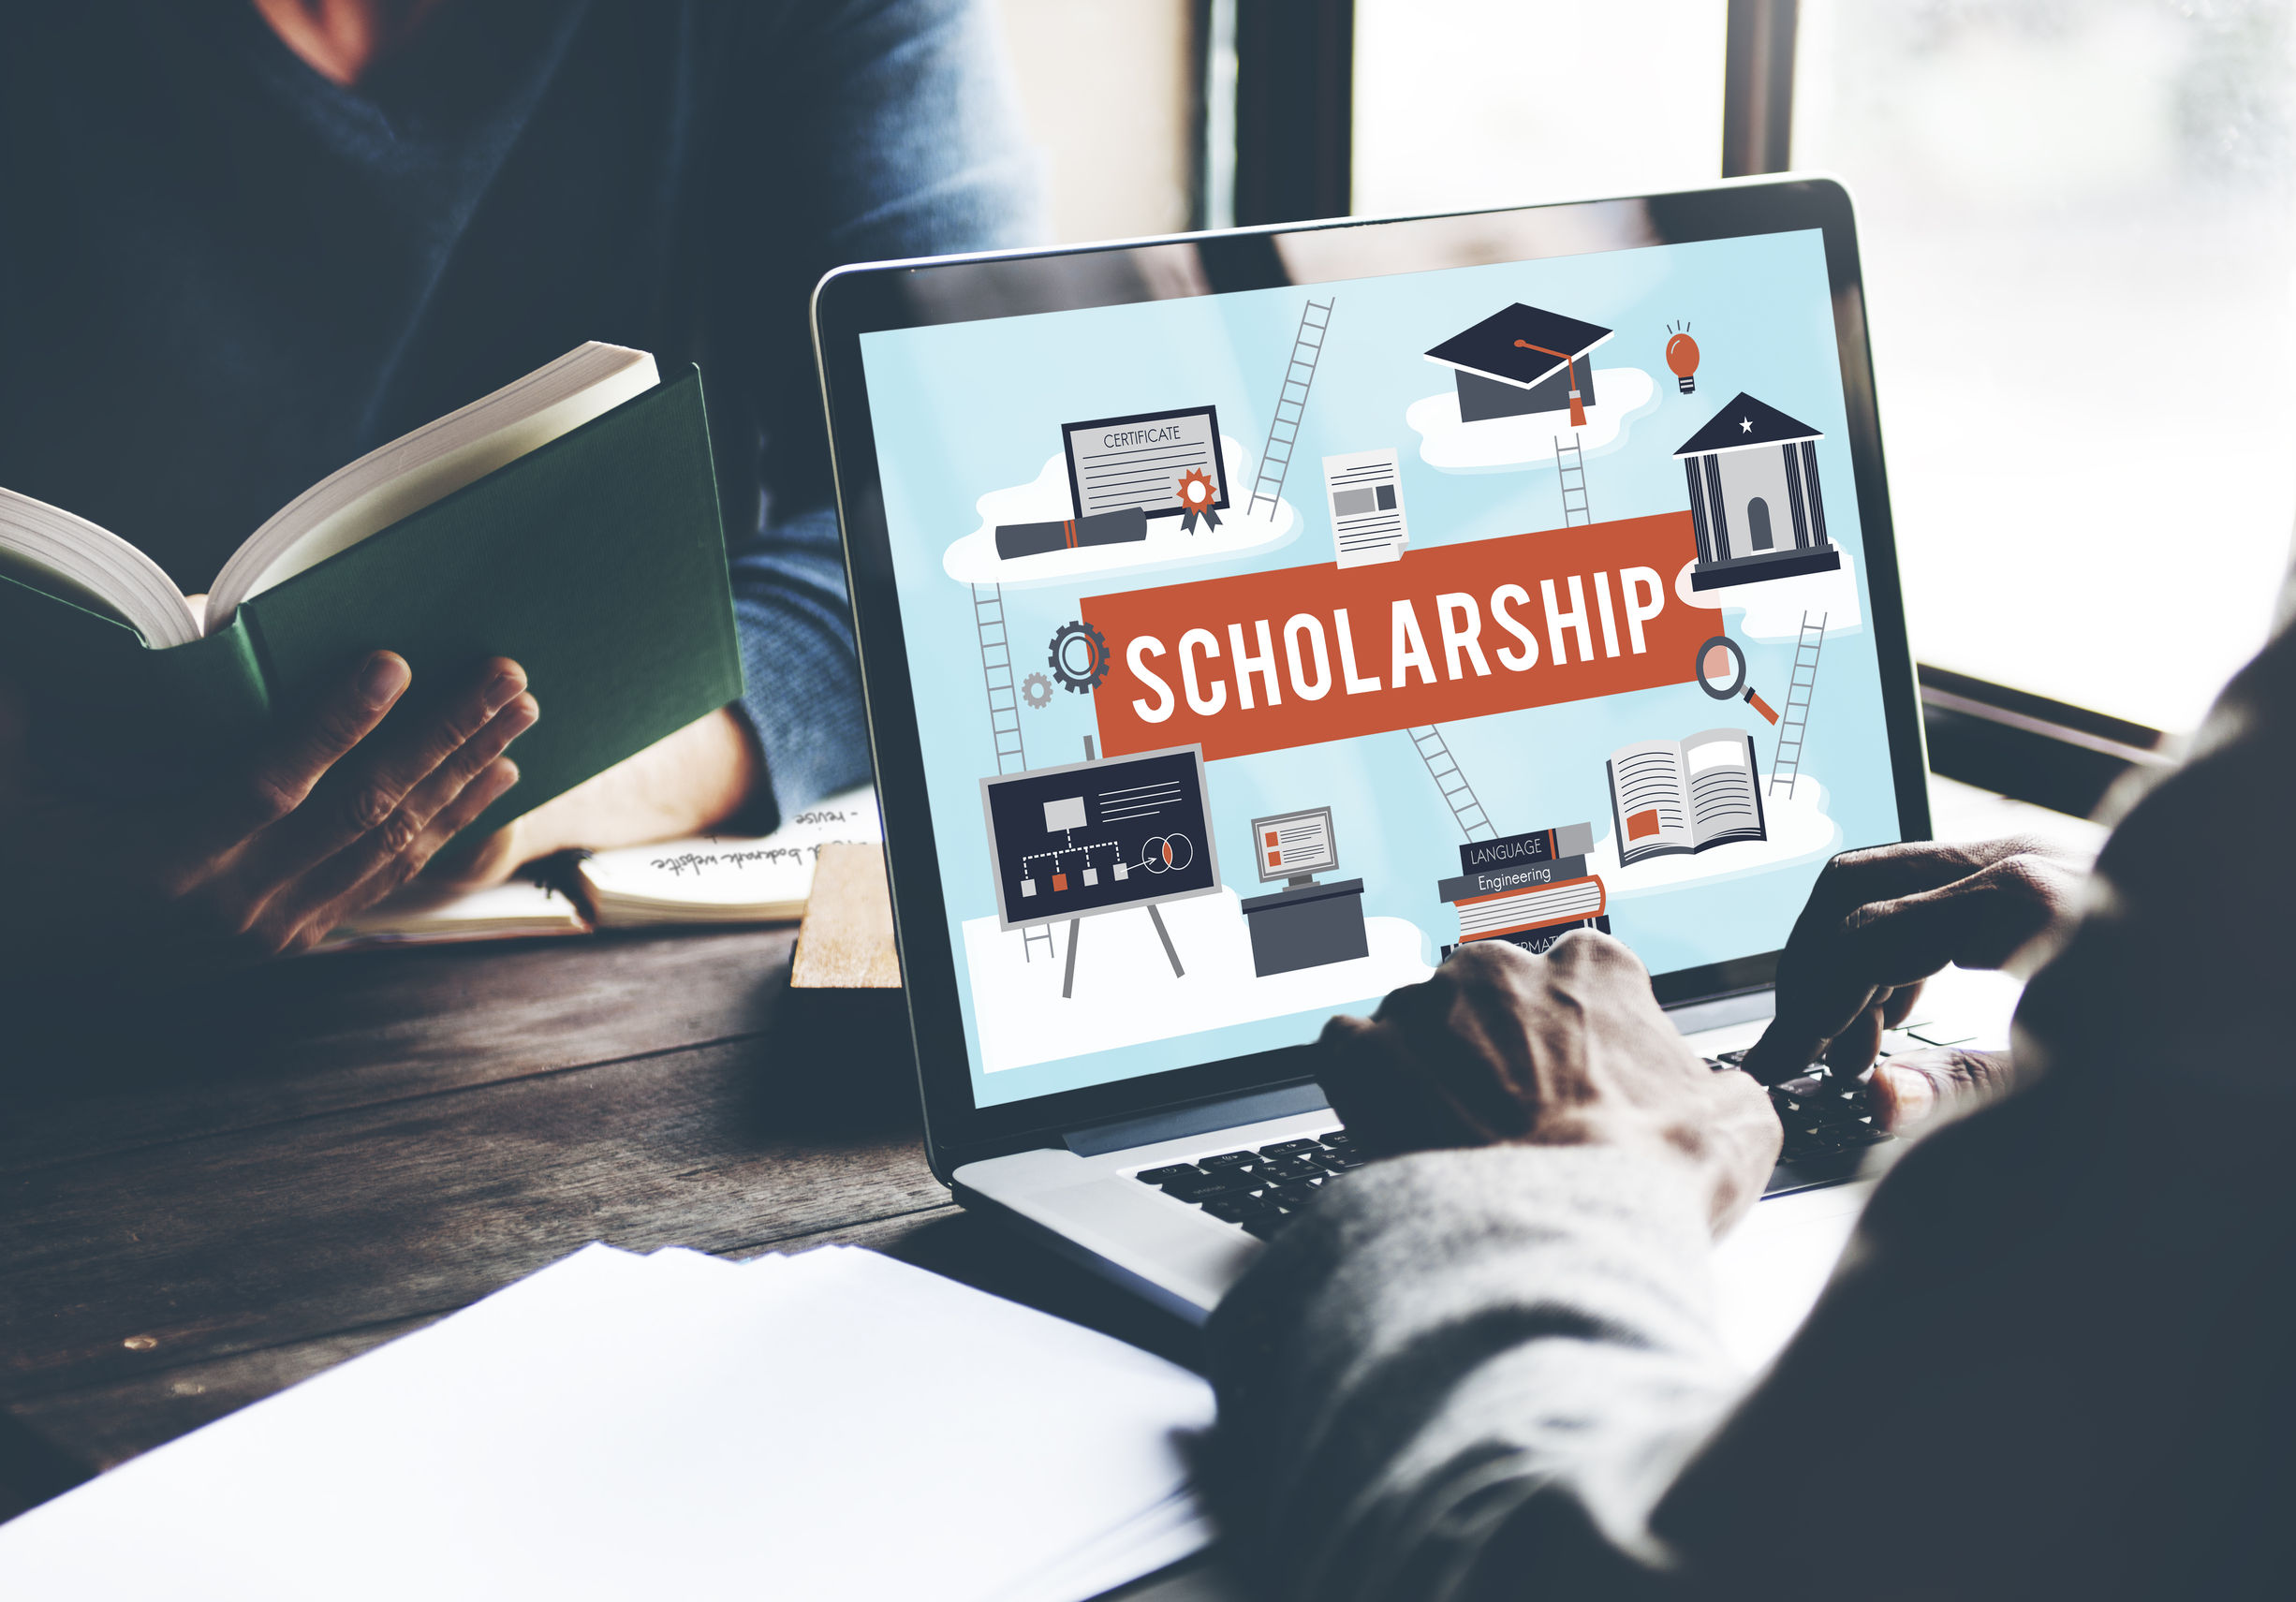 scholarship aid college education loan money concept for scholarship search sites